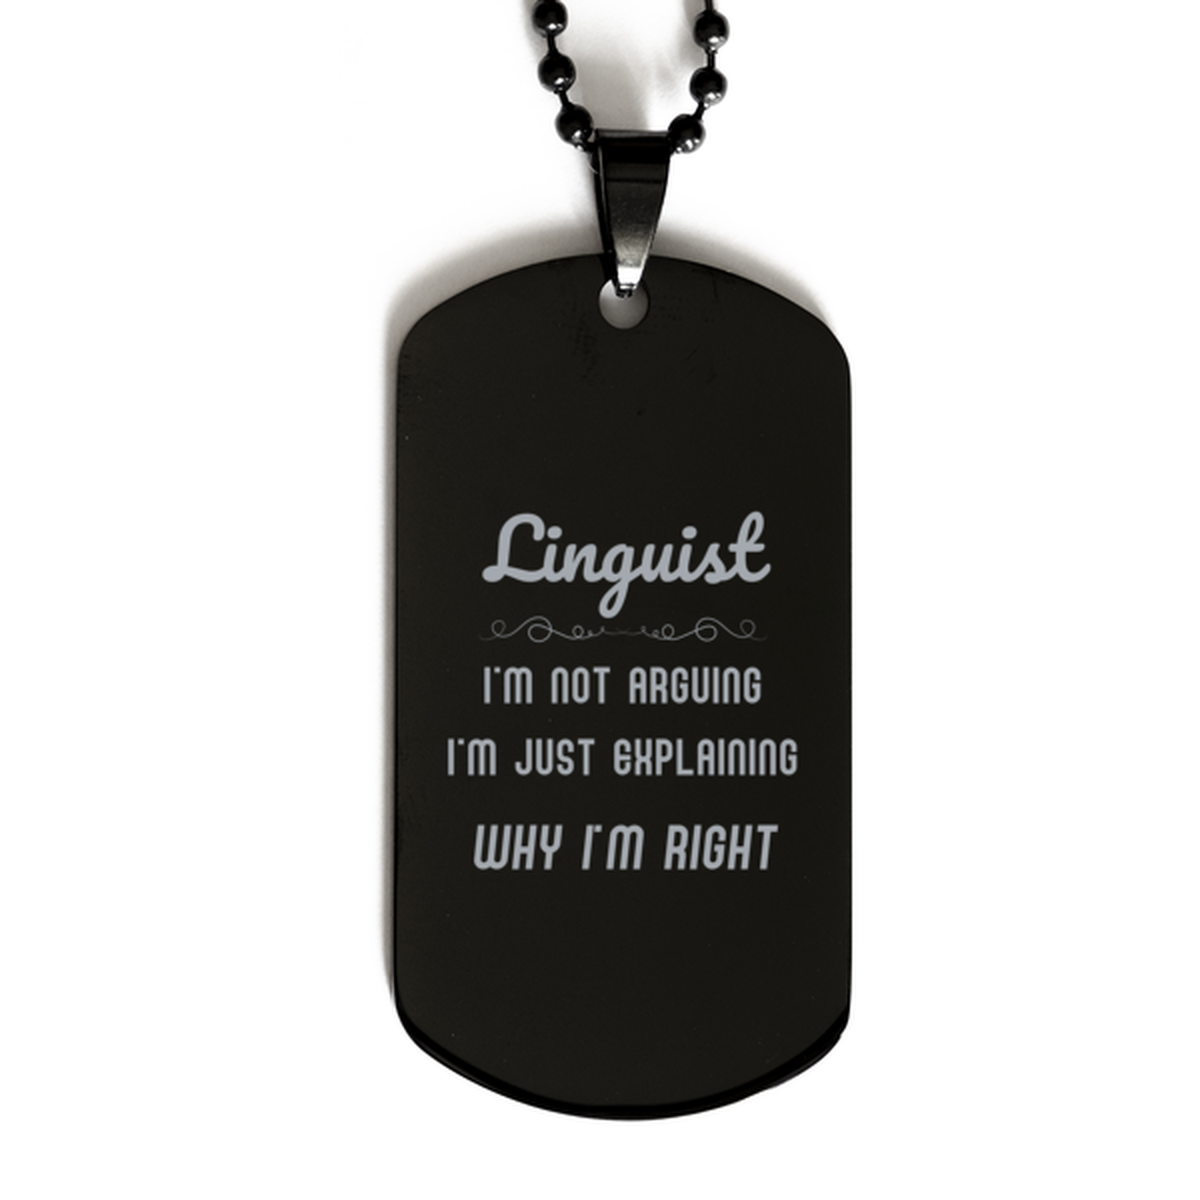 Linguist I'm not Arguing. I'm Just Explaining Why I'm RIGHT Black Dog Tag, Funny Saying Quote Linguist Gifts For Linguist Graduation Birthday Christmas Gifts for Men Women Coworker